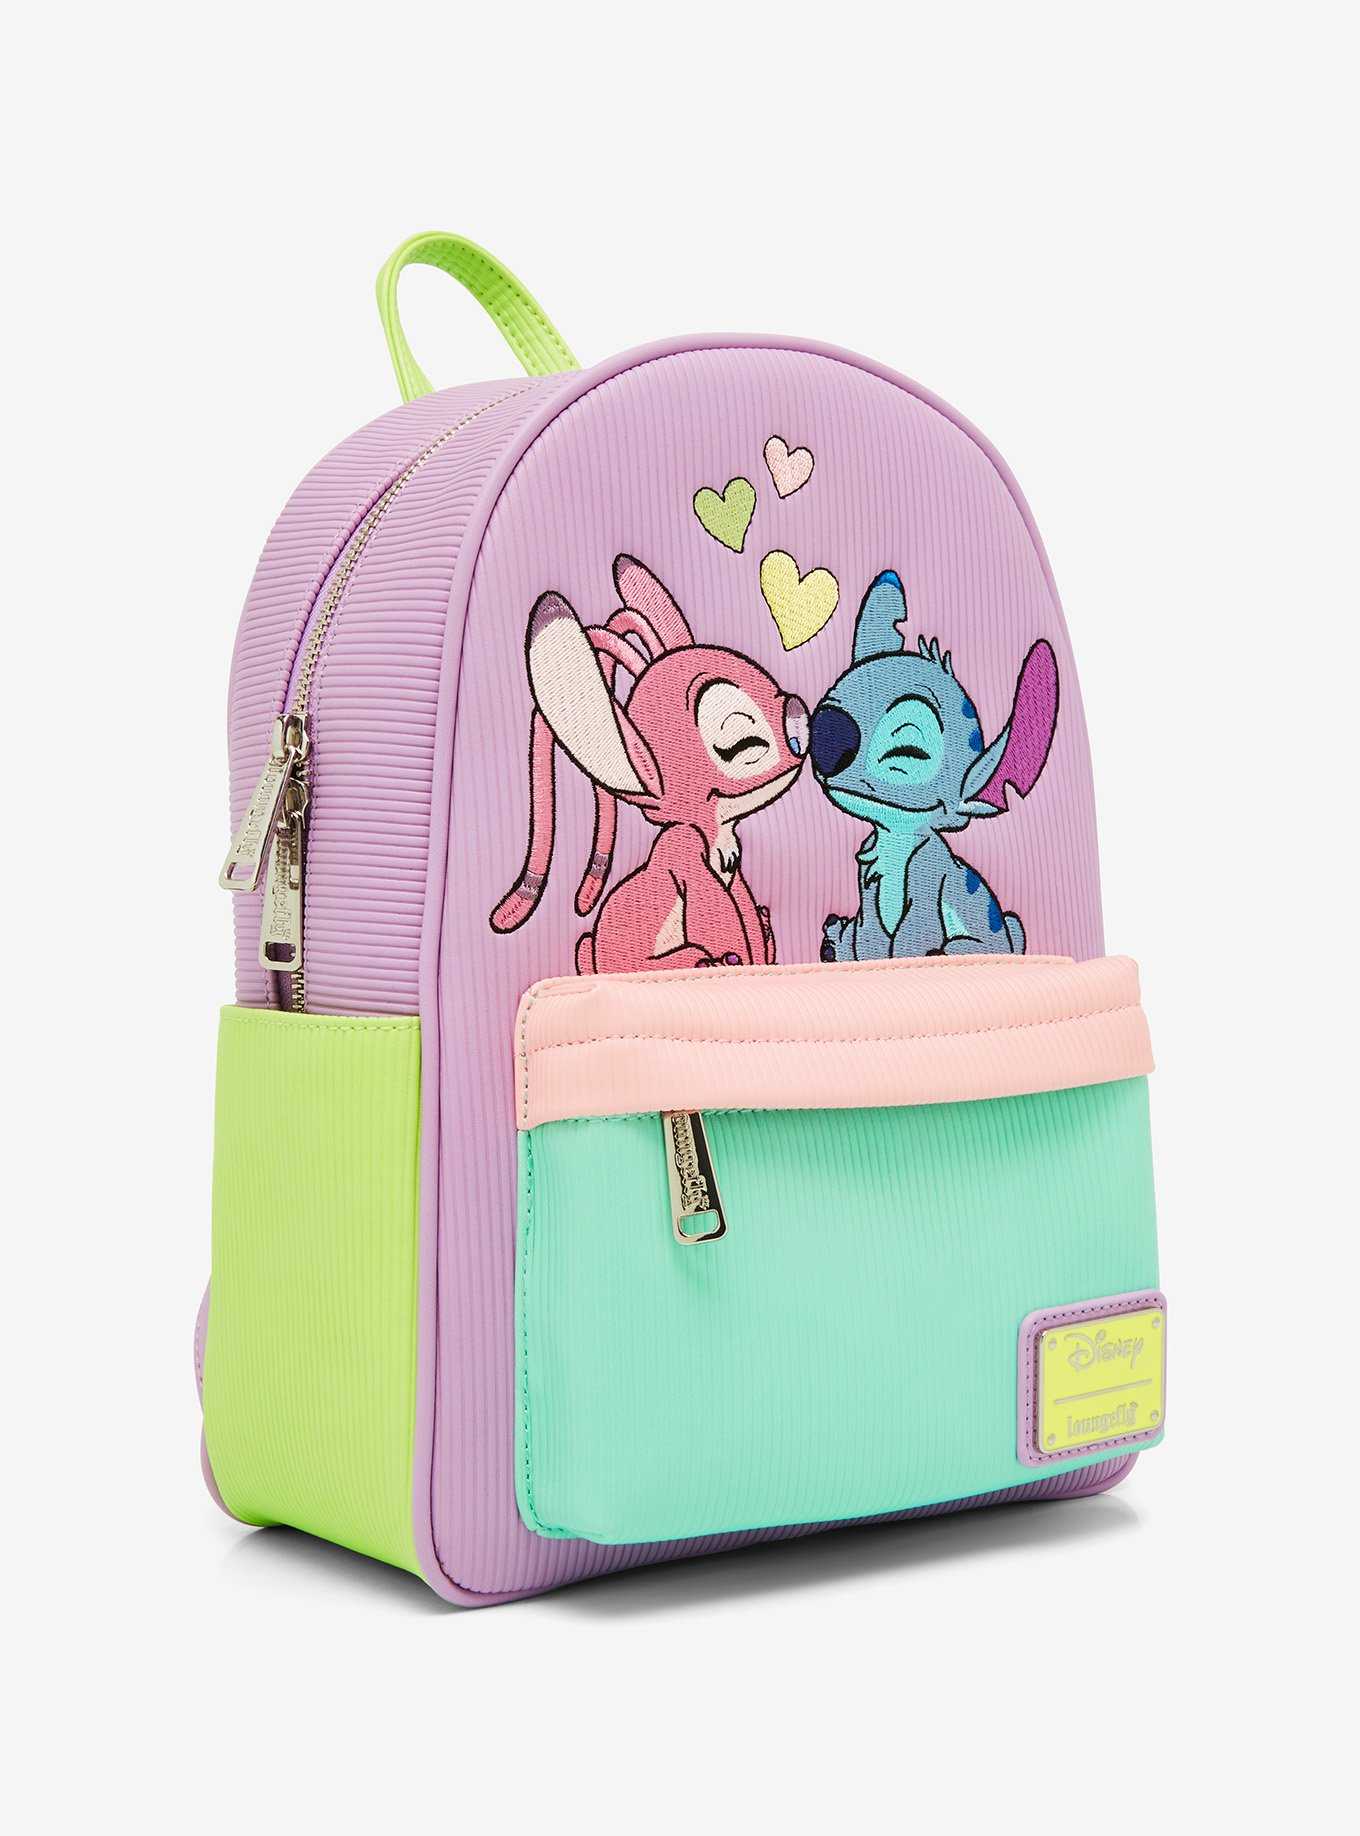 Lilo and Stitch Mini Backpacks - Get Yours Now!